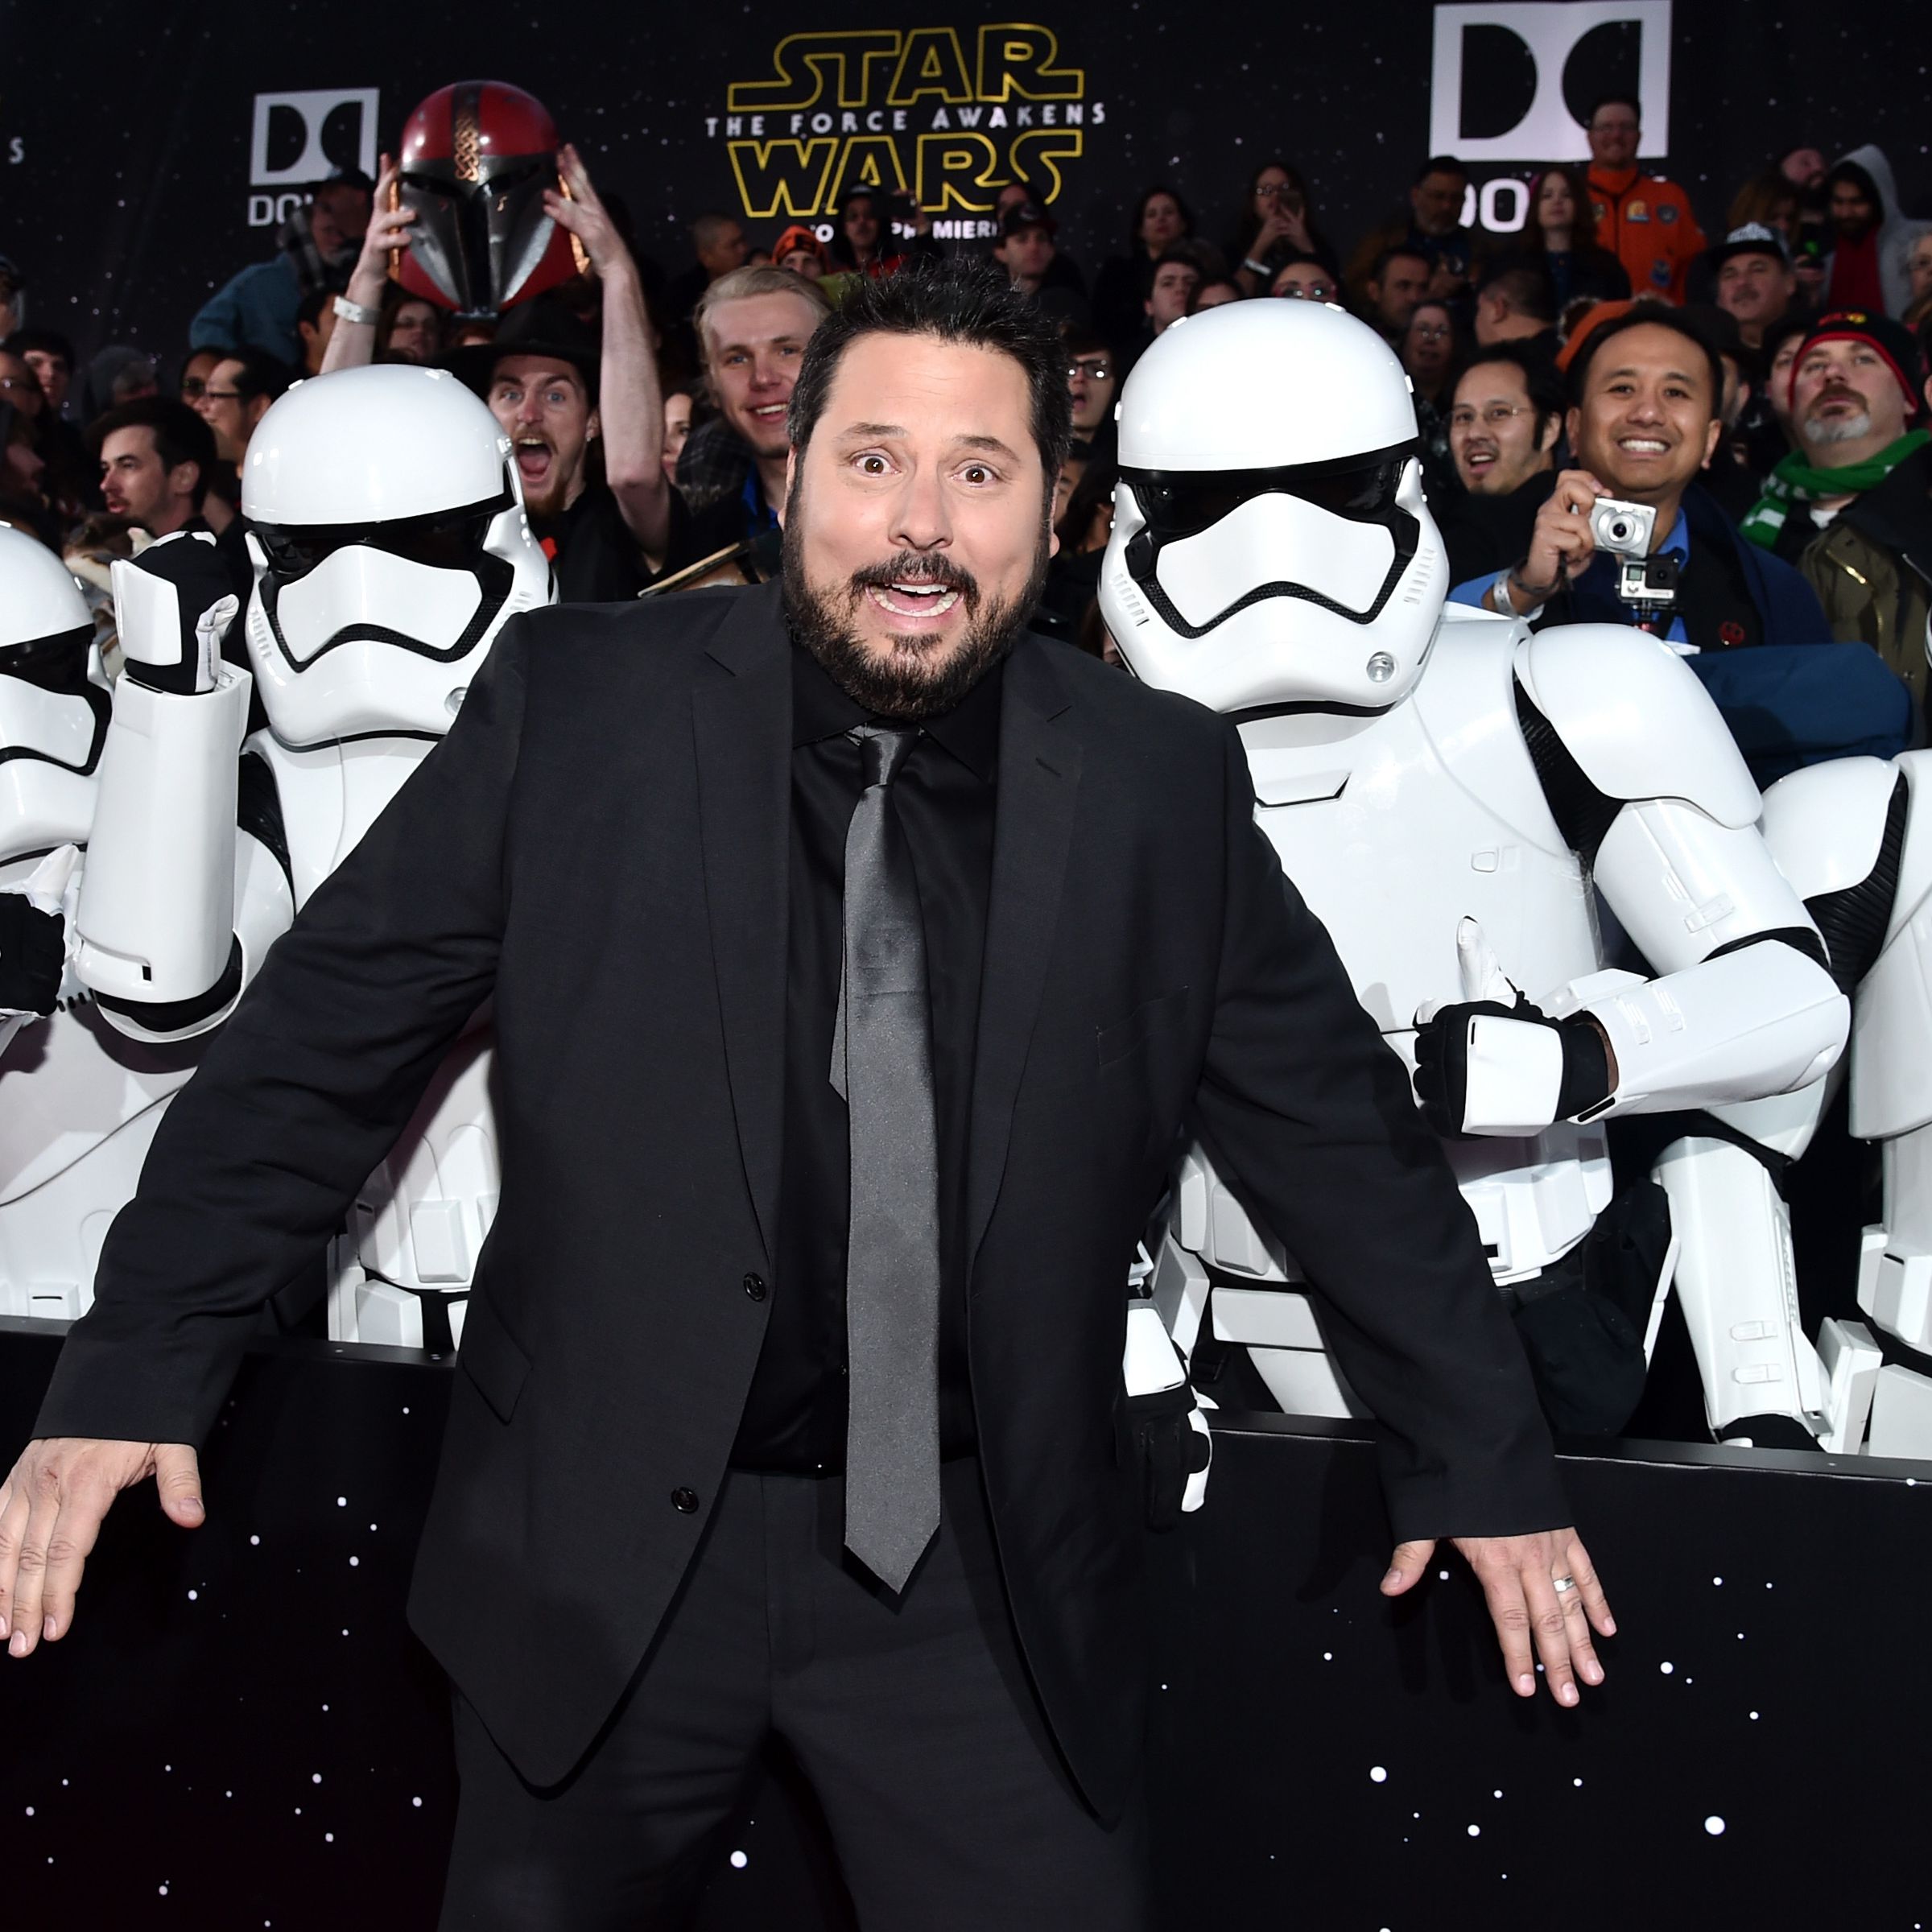 Premiere Of “Star Wars: The Force Awakens” - Red Carpet